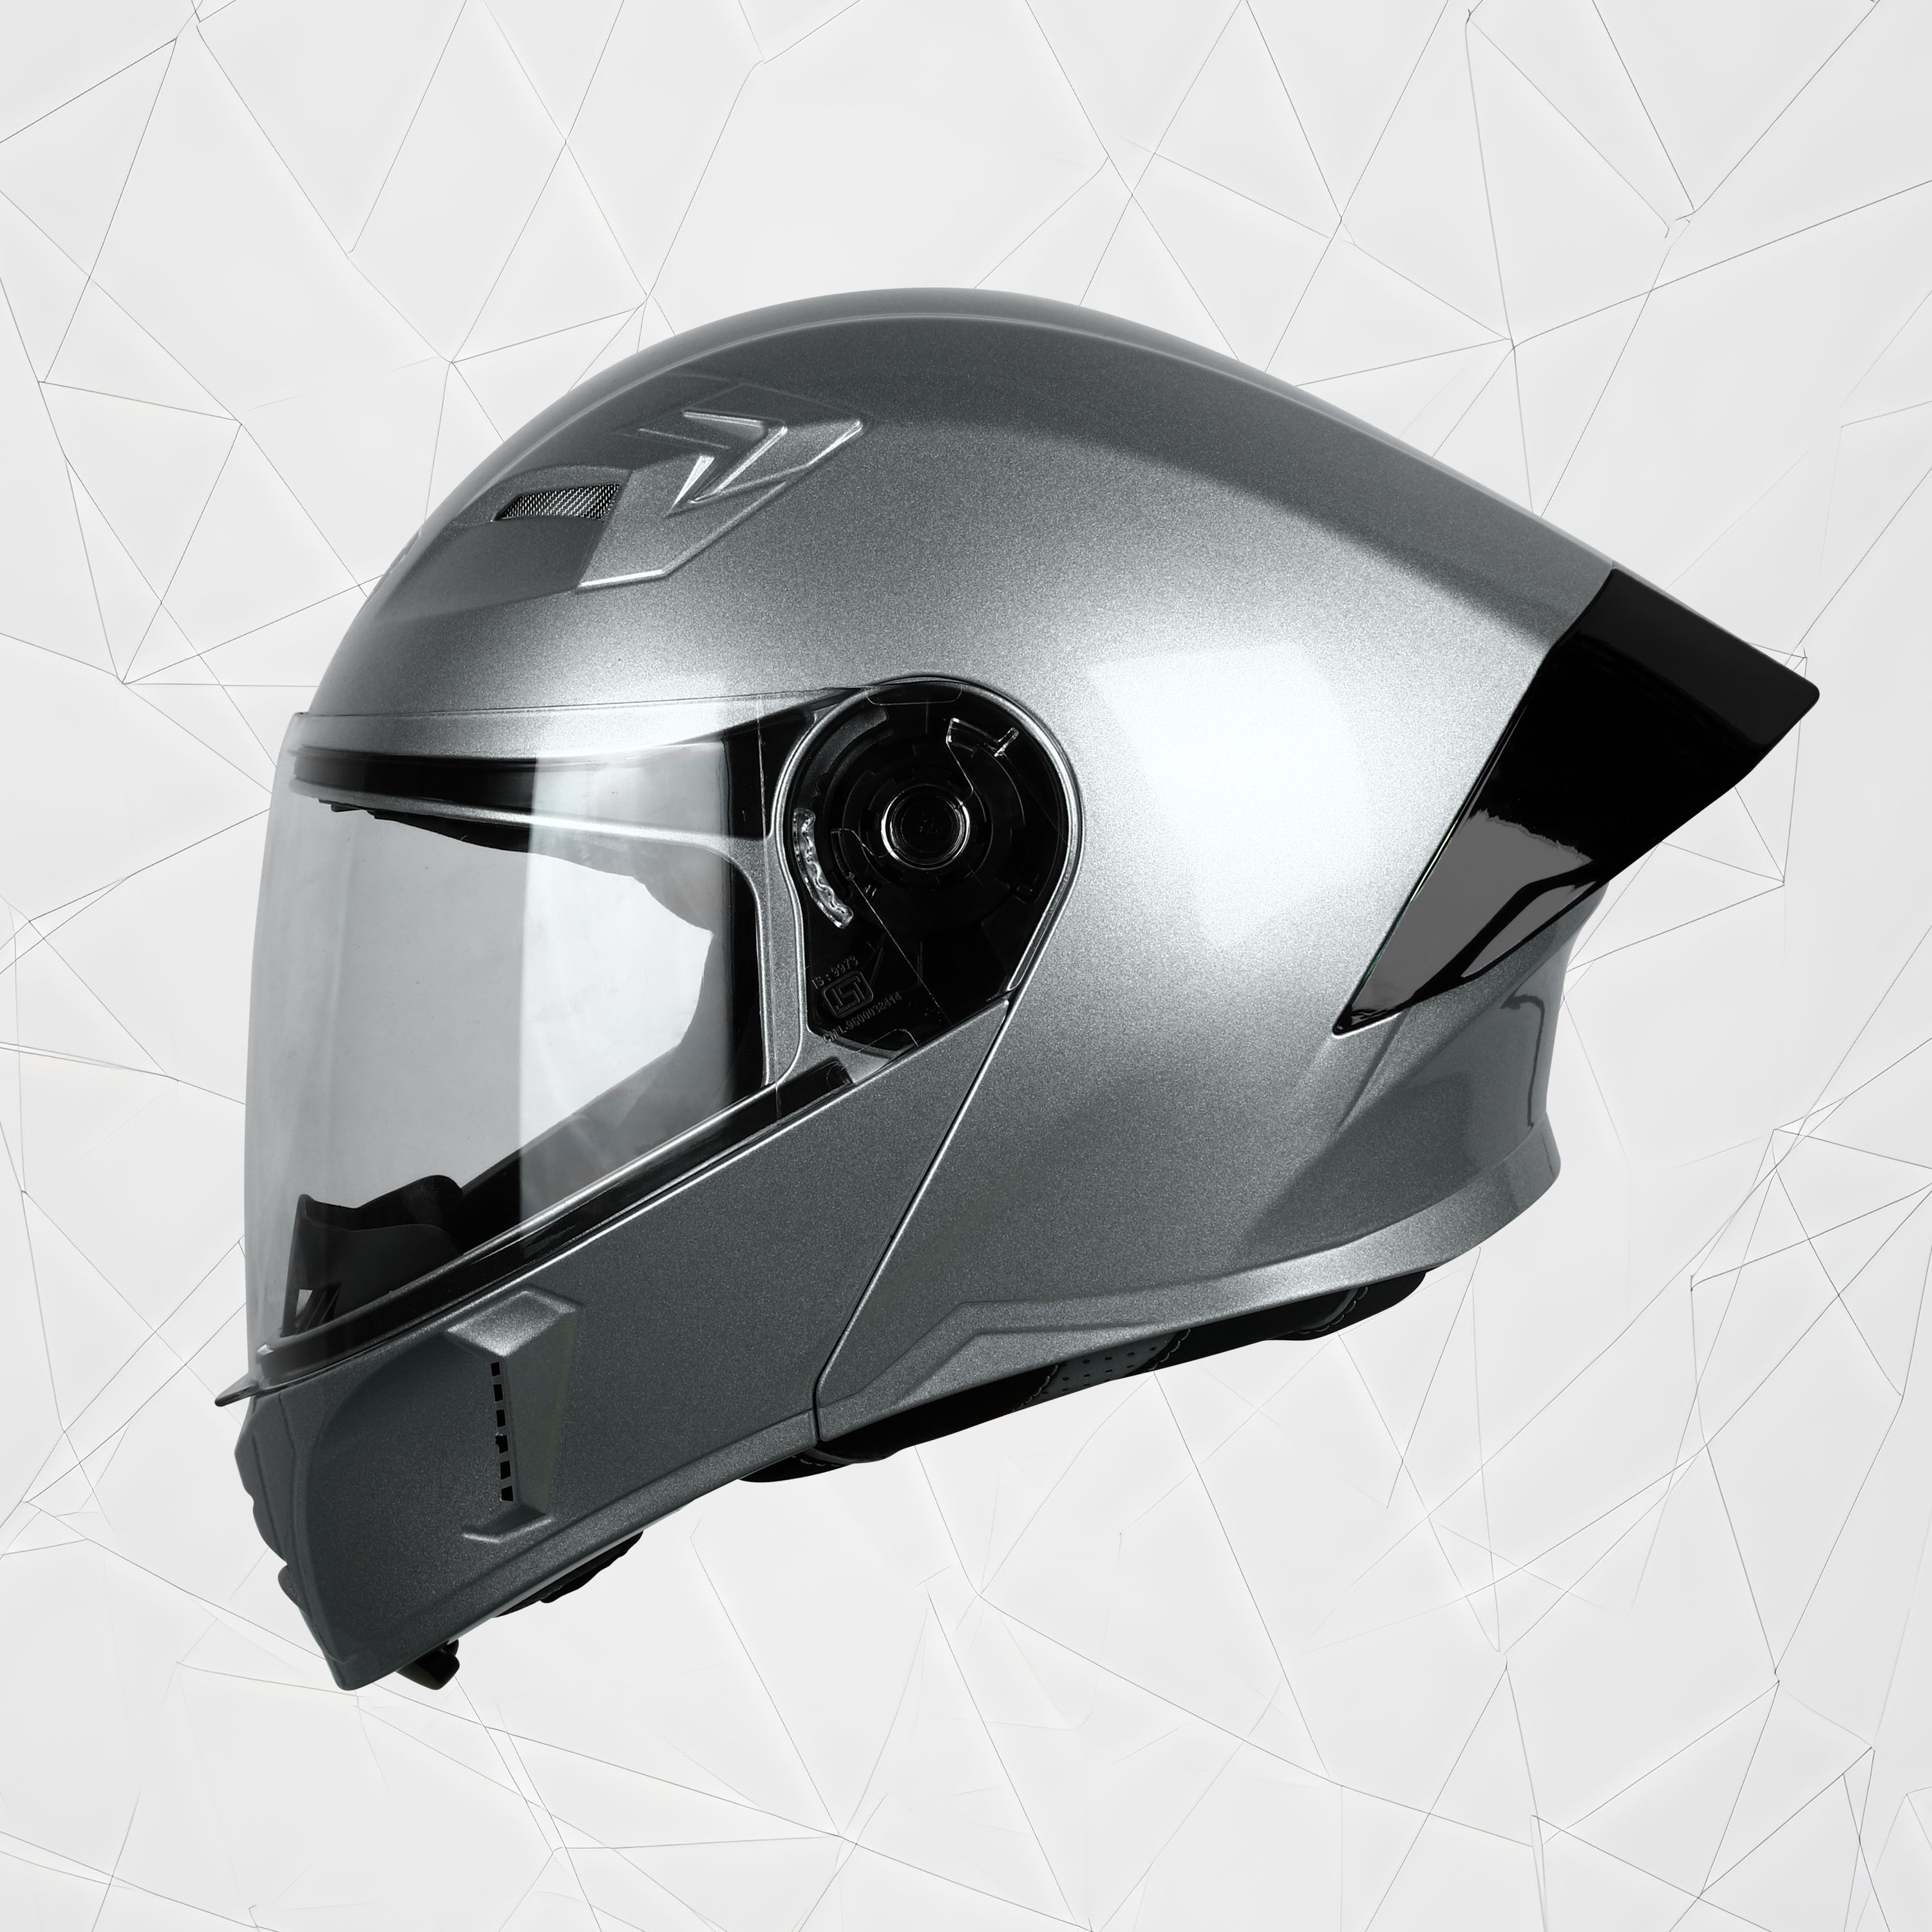 Steelbird SBA-20 7Wings ISI Certified Flip-Up Helmet With Black Spoiler For Men And Women (Glossy Silver With Clear Visor)